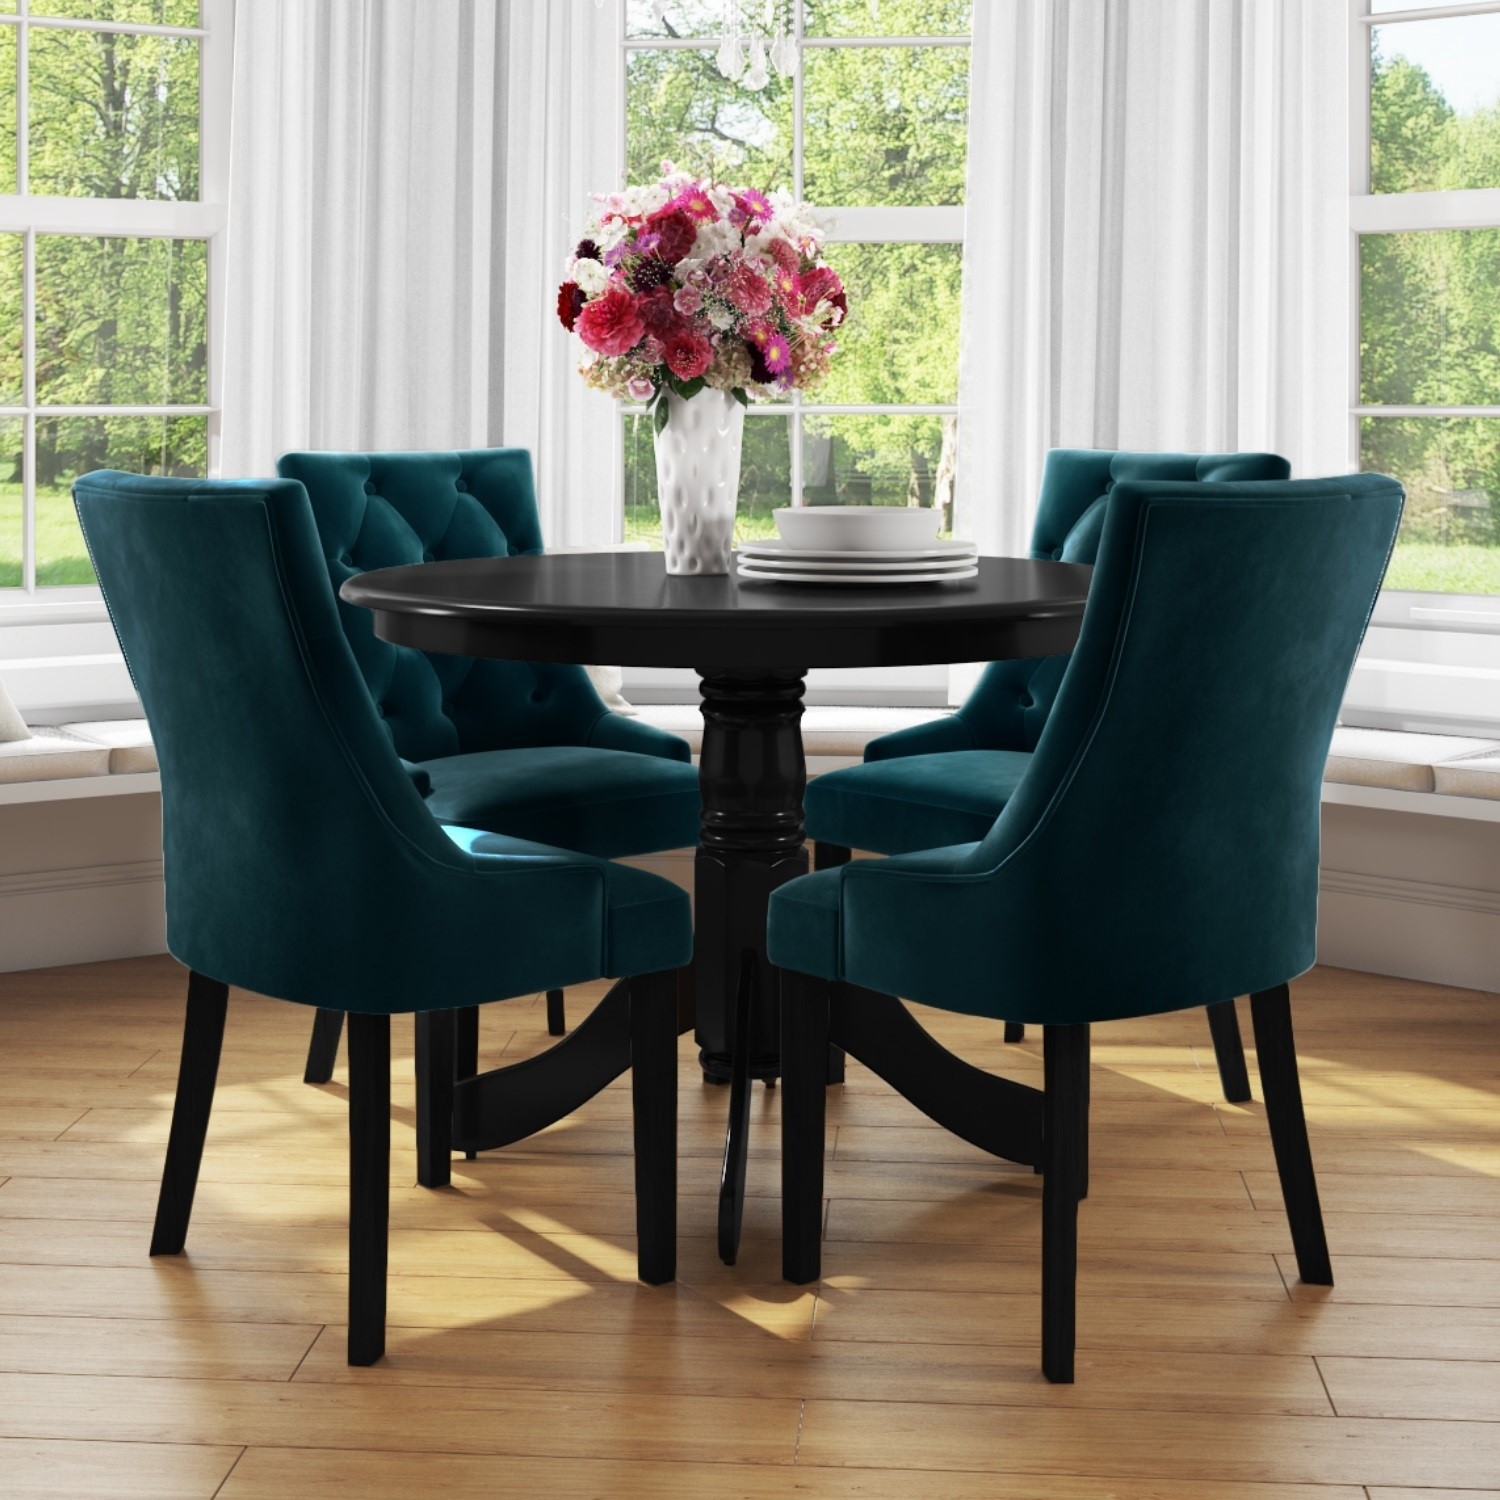 Small Round Dining Table In Black With, Small Round Black Dining Table And Chairs